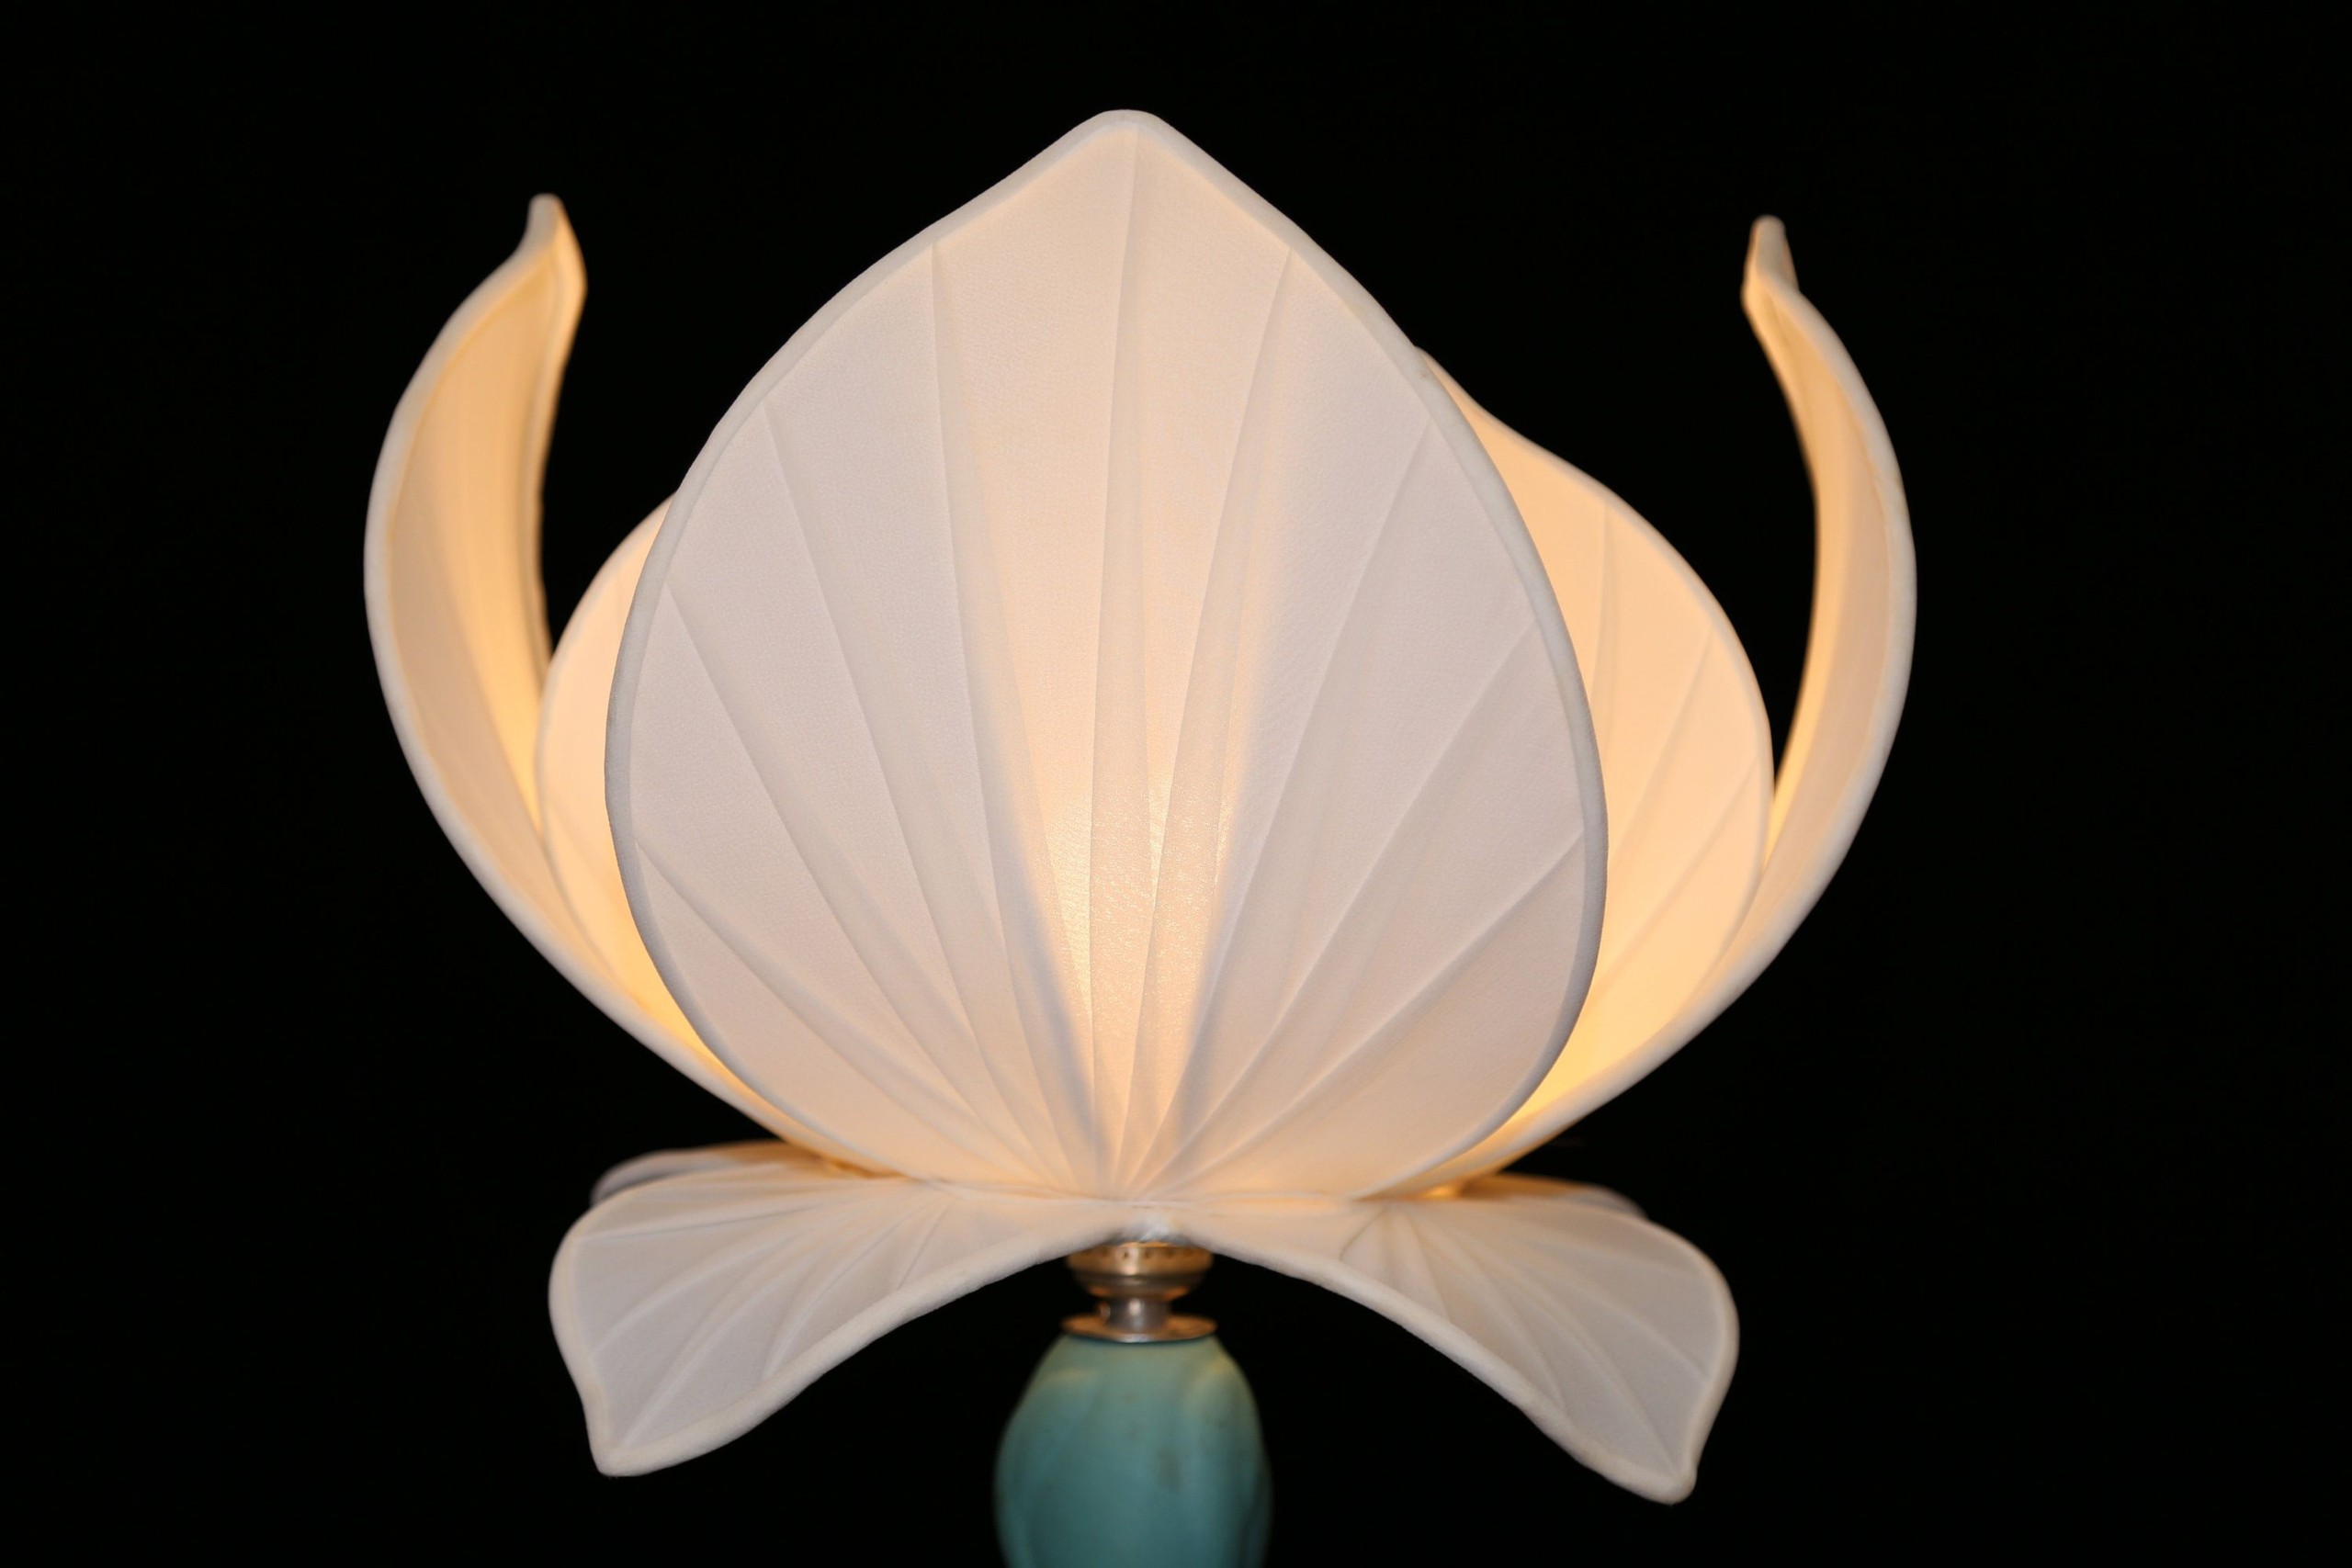 Vintage lotus flower lampshade authentic white fabric